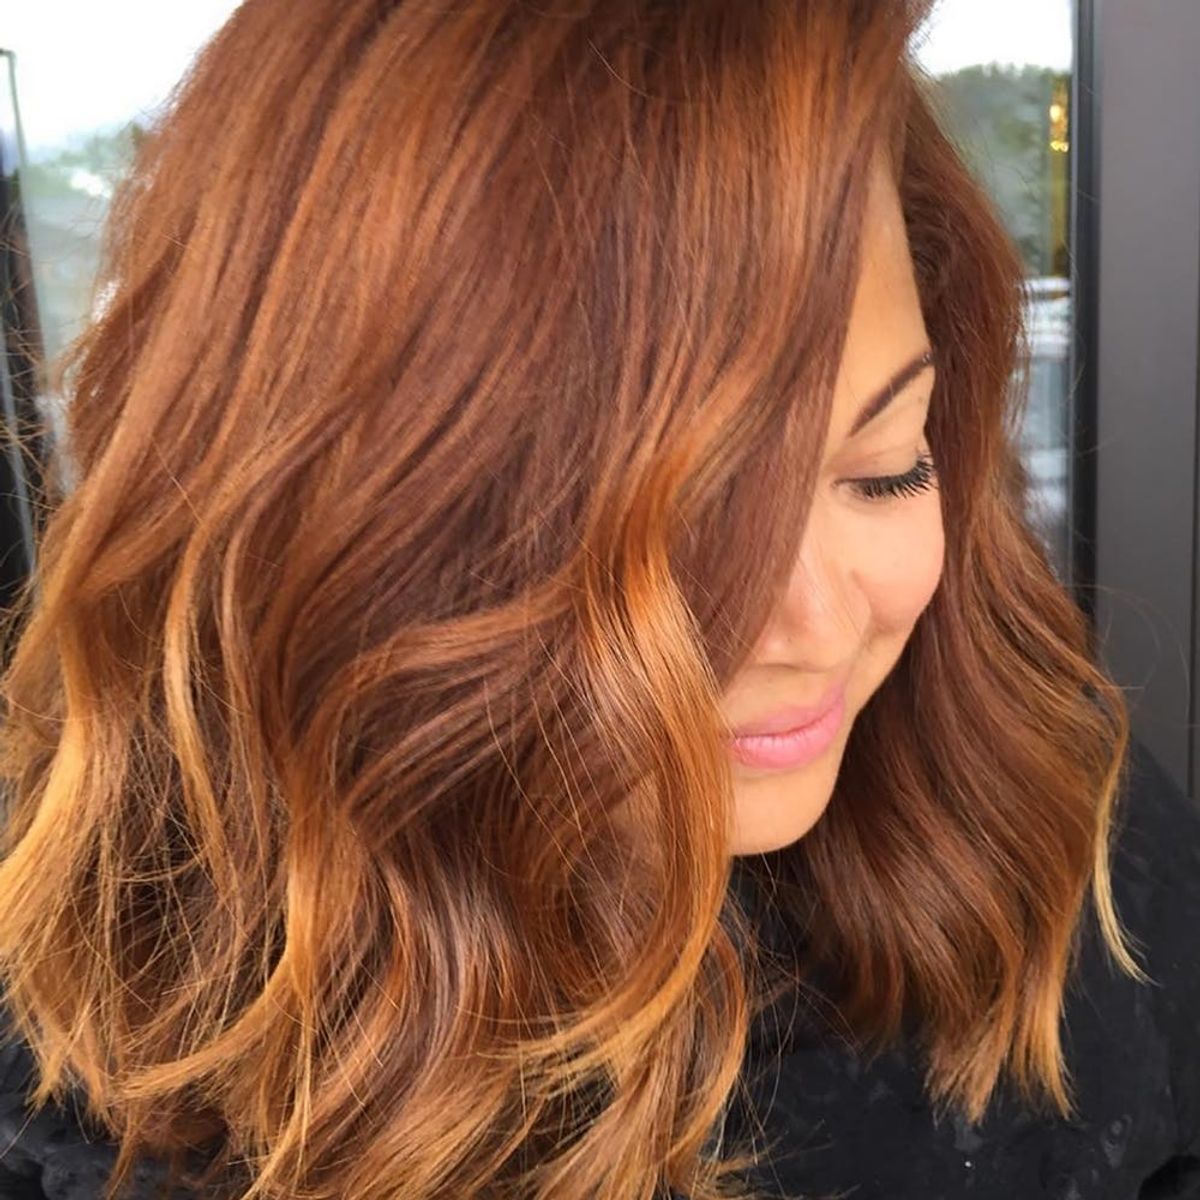 An Expert Sounds Off on How to Rock PSL Hair by Halloween